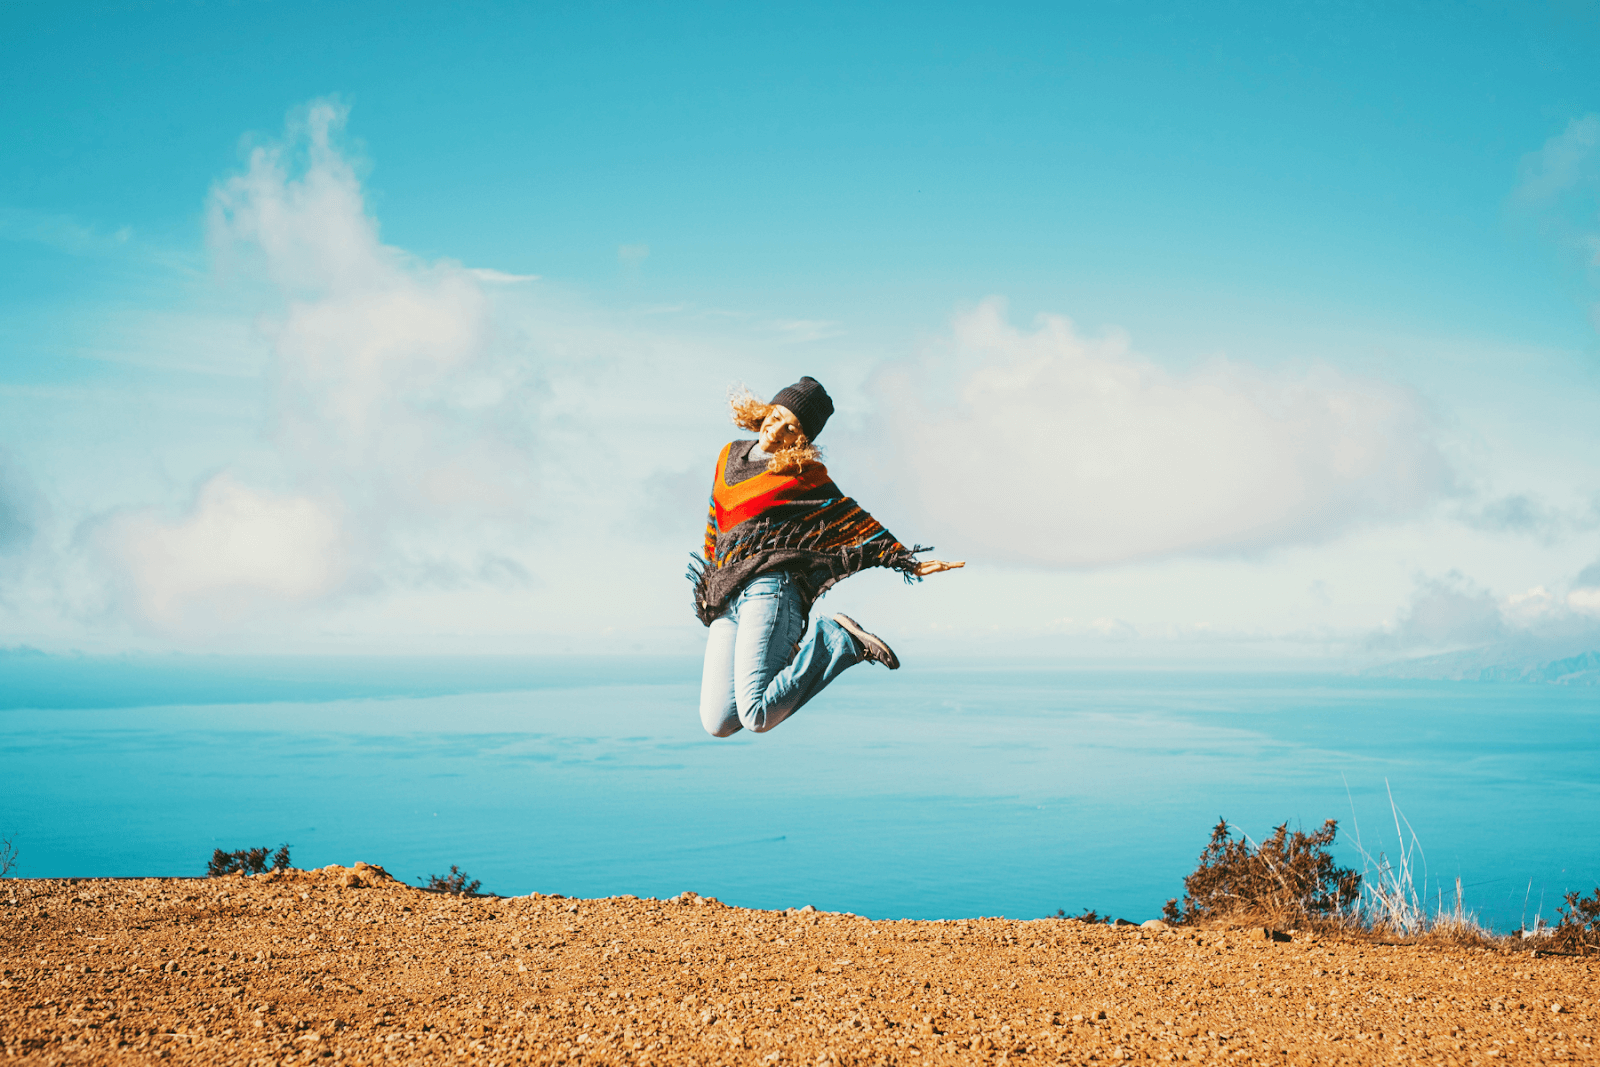 The image displays a woman jumping into the air on top of a mountain with a beautiful ocean in the background. The mountaintop is dirt with a few shrubs, while the woman wears a beanie, jeans, and a poncho.